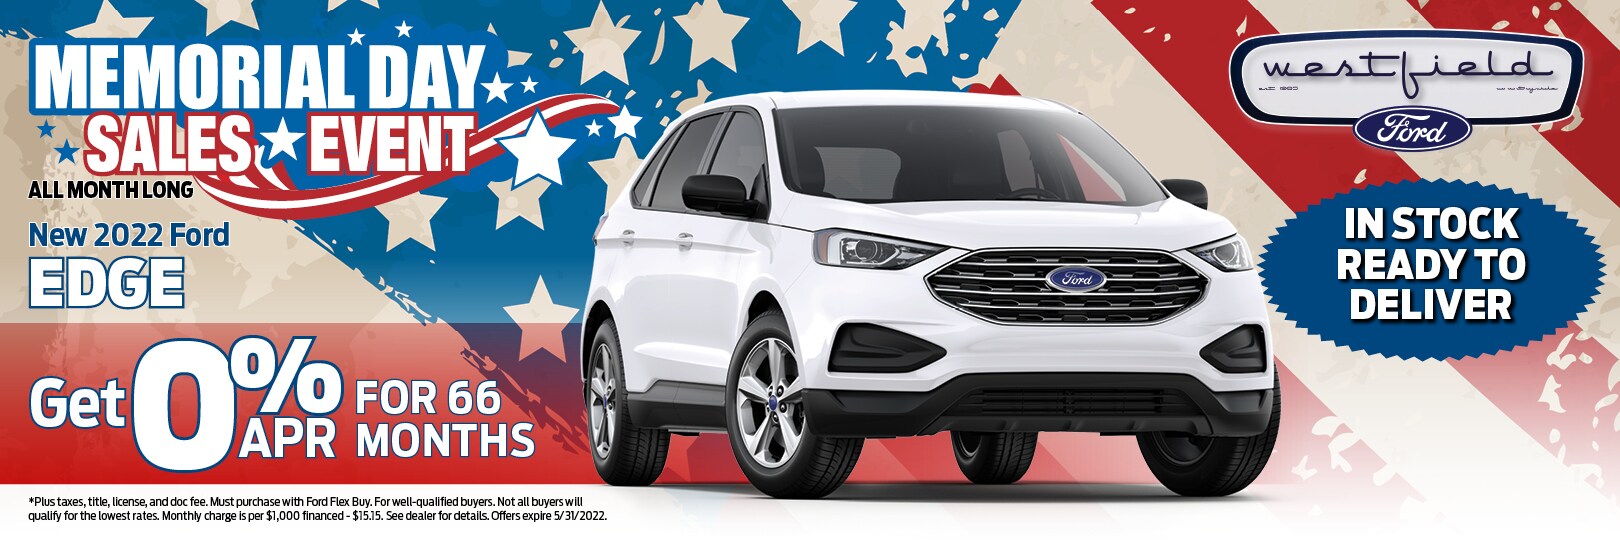 New 2022 Ford Edge Offer
| Countryside, IL